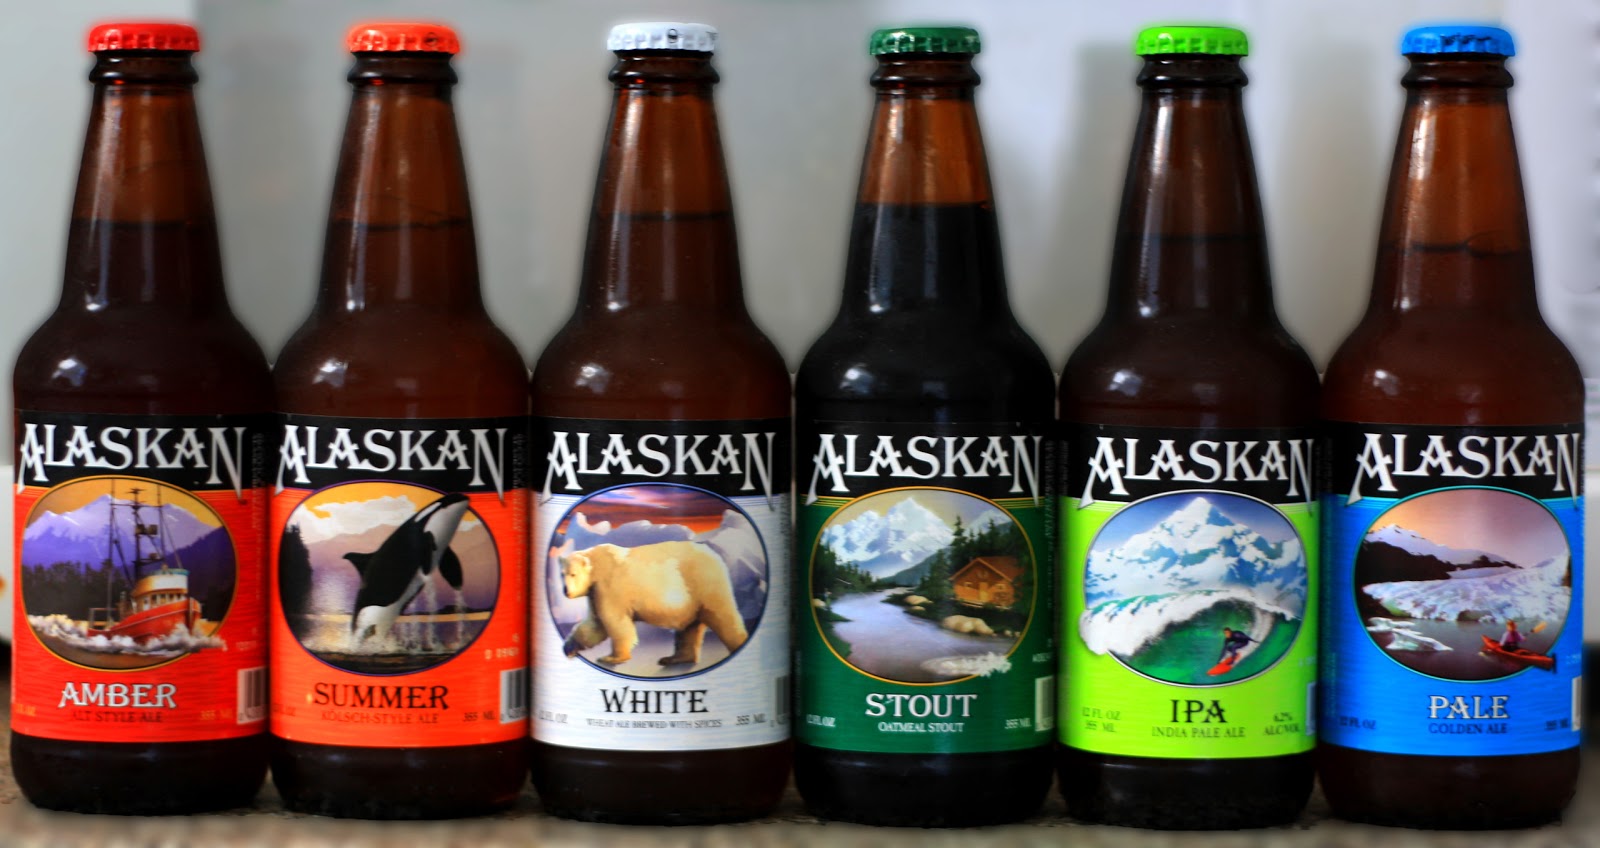 Whats the best before date for alaskan beer?